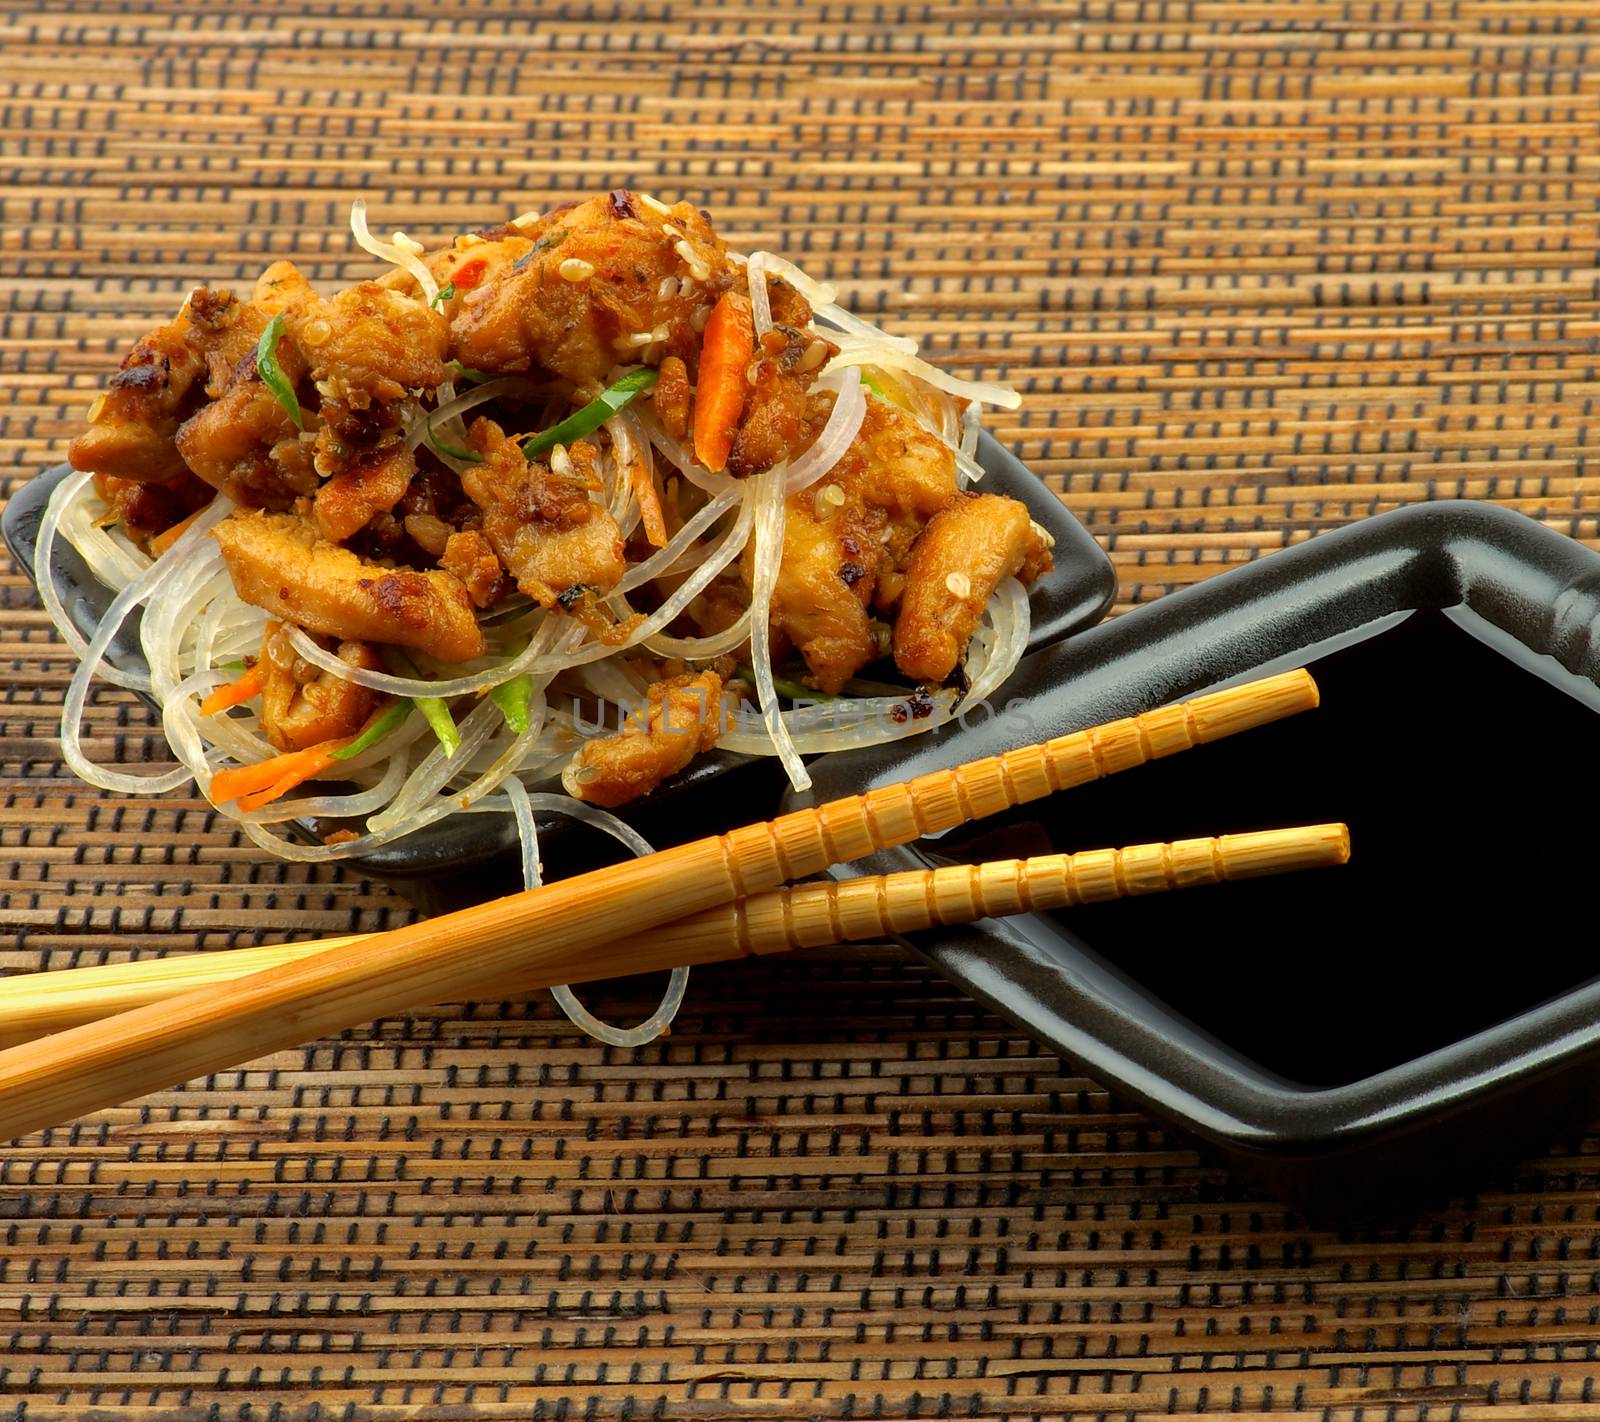 Delicious Chicken Teriyaki with Chinese Glass Noodles and Soy Sauce in Black Bowls with Chopsticks closeup on Strawmat background